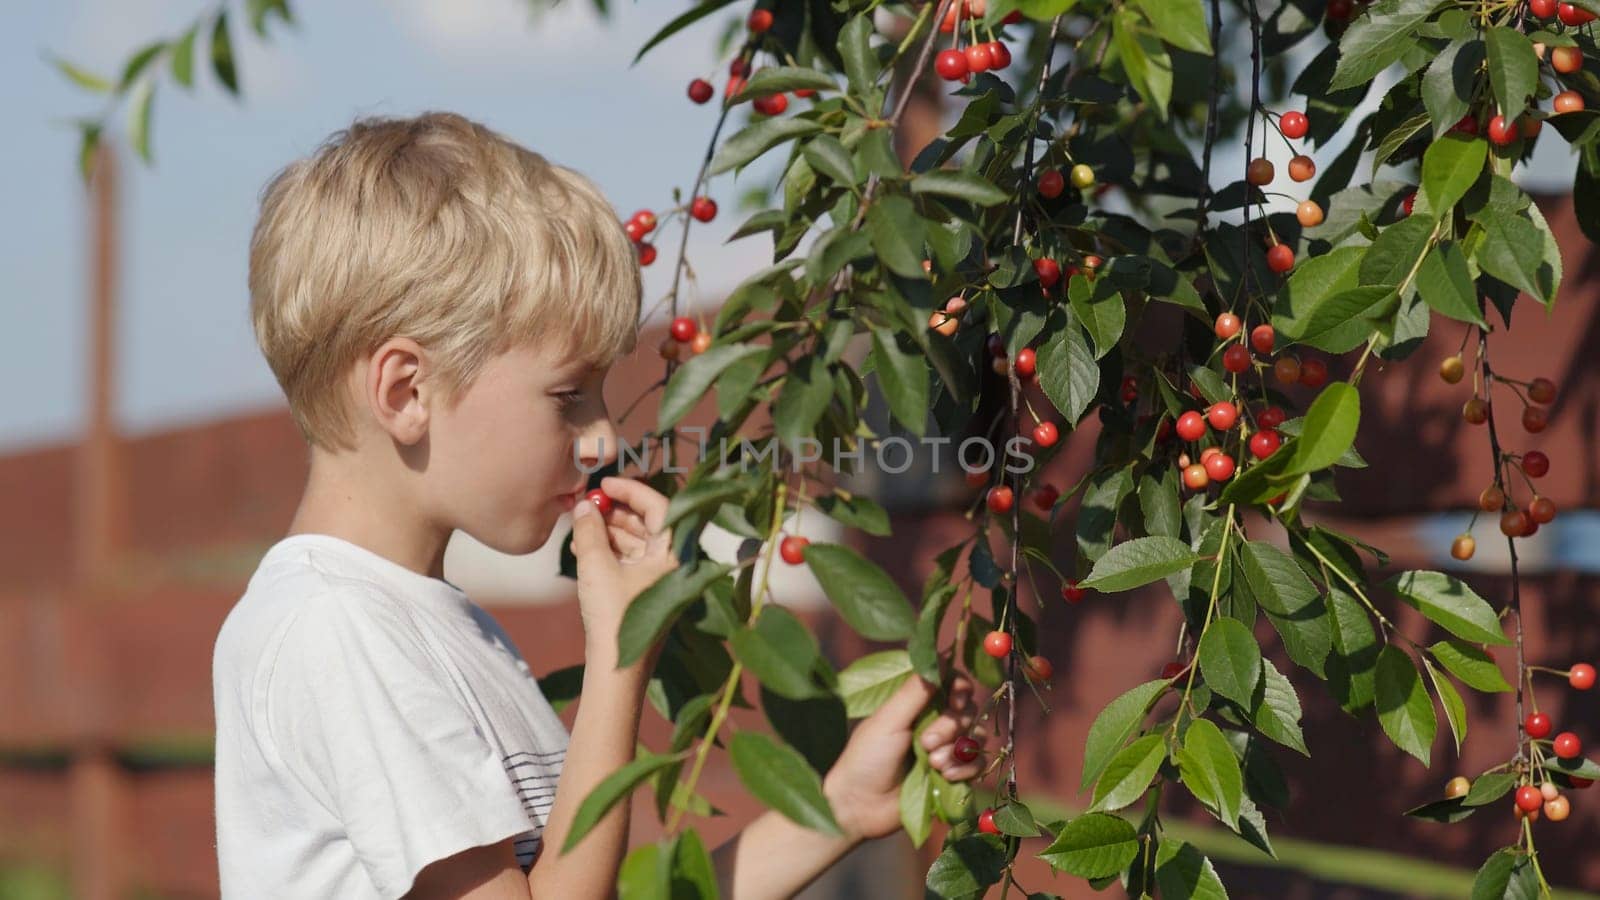 A boy picks cherry berries from a tree and eats them